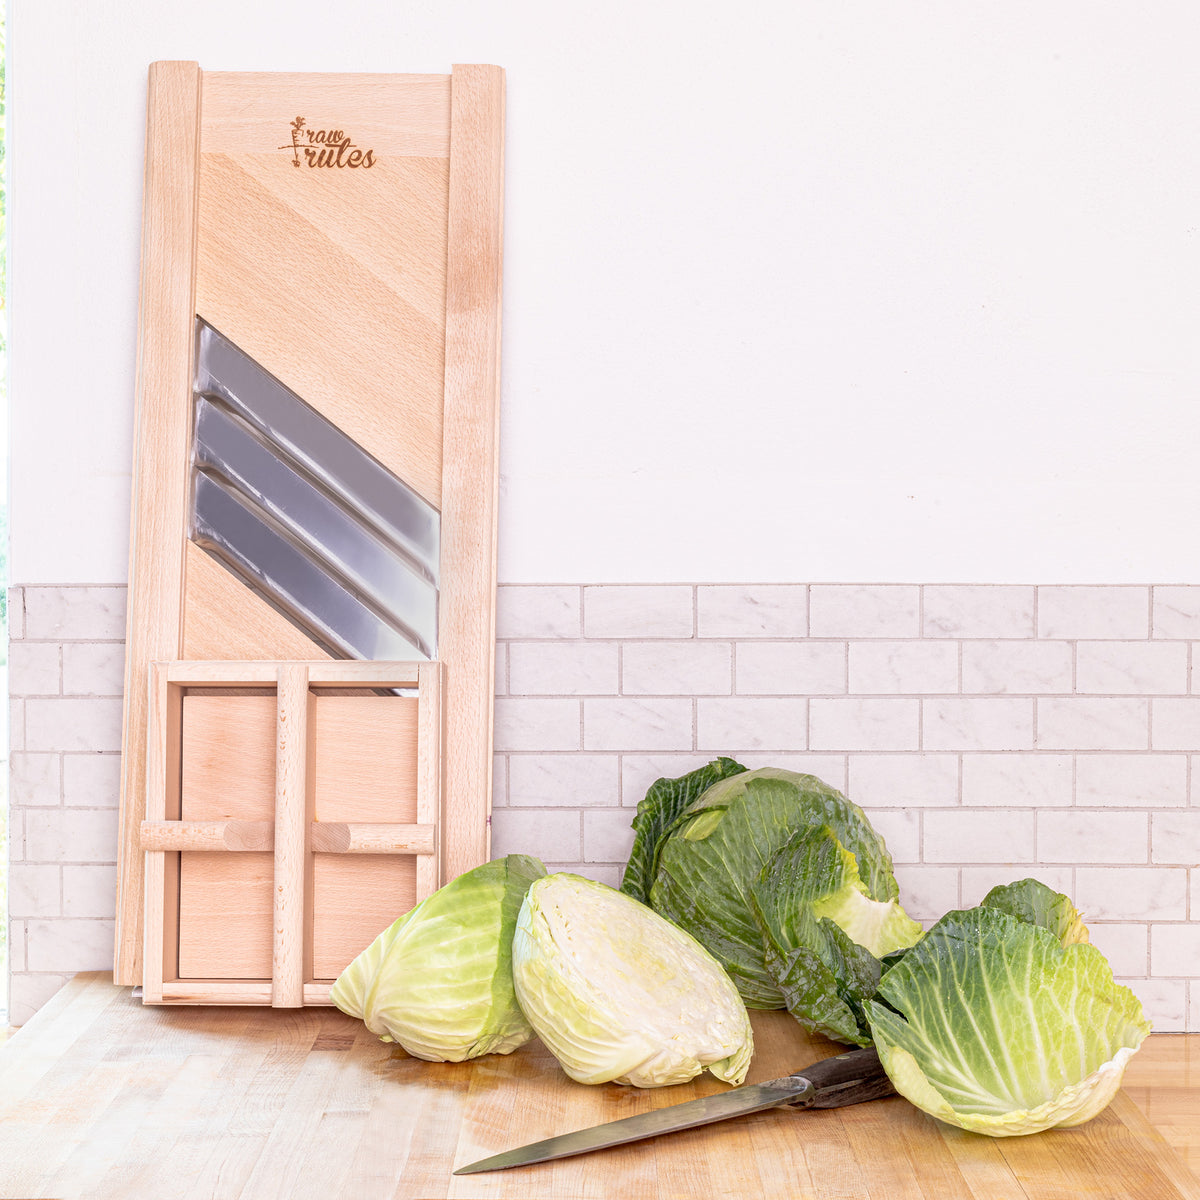 Raw Rutes - Compact Wooden Cabbage Shredder with Hand Guard